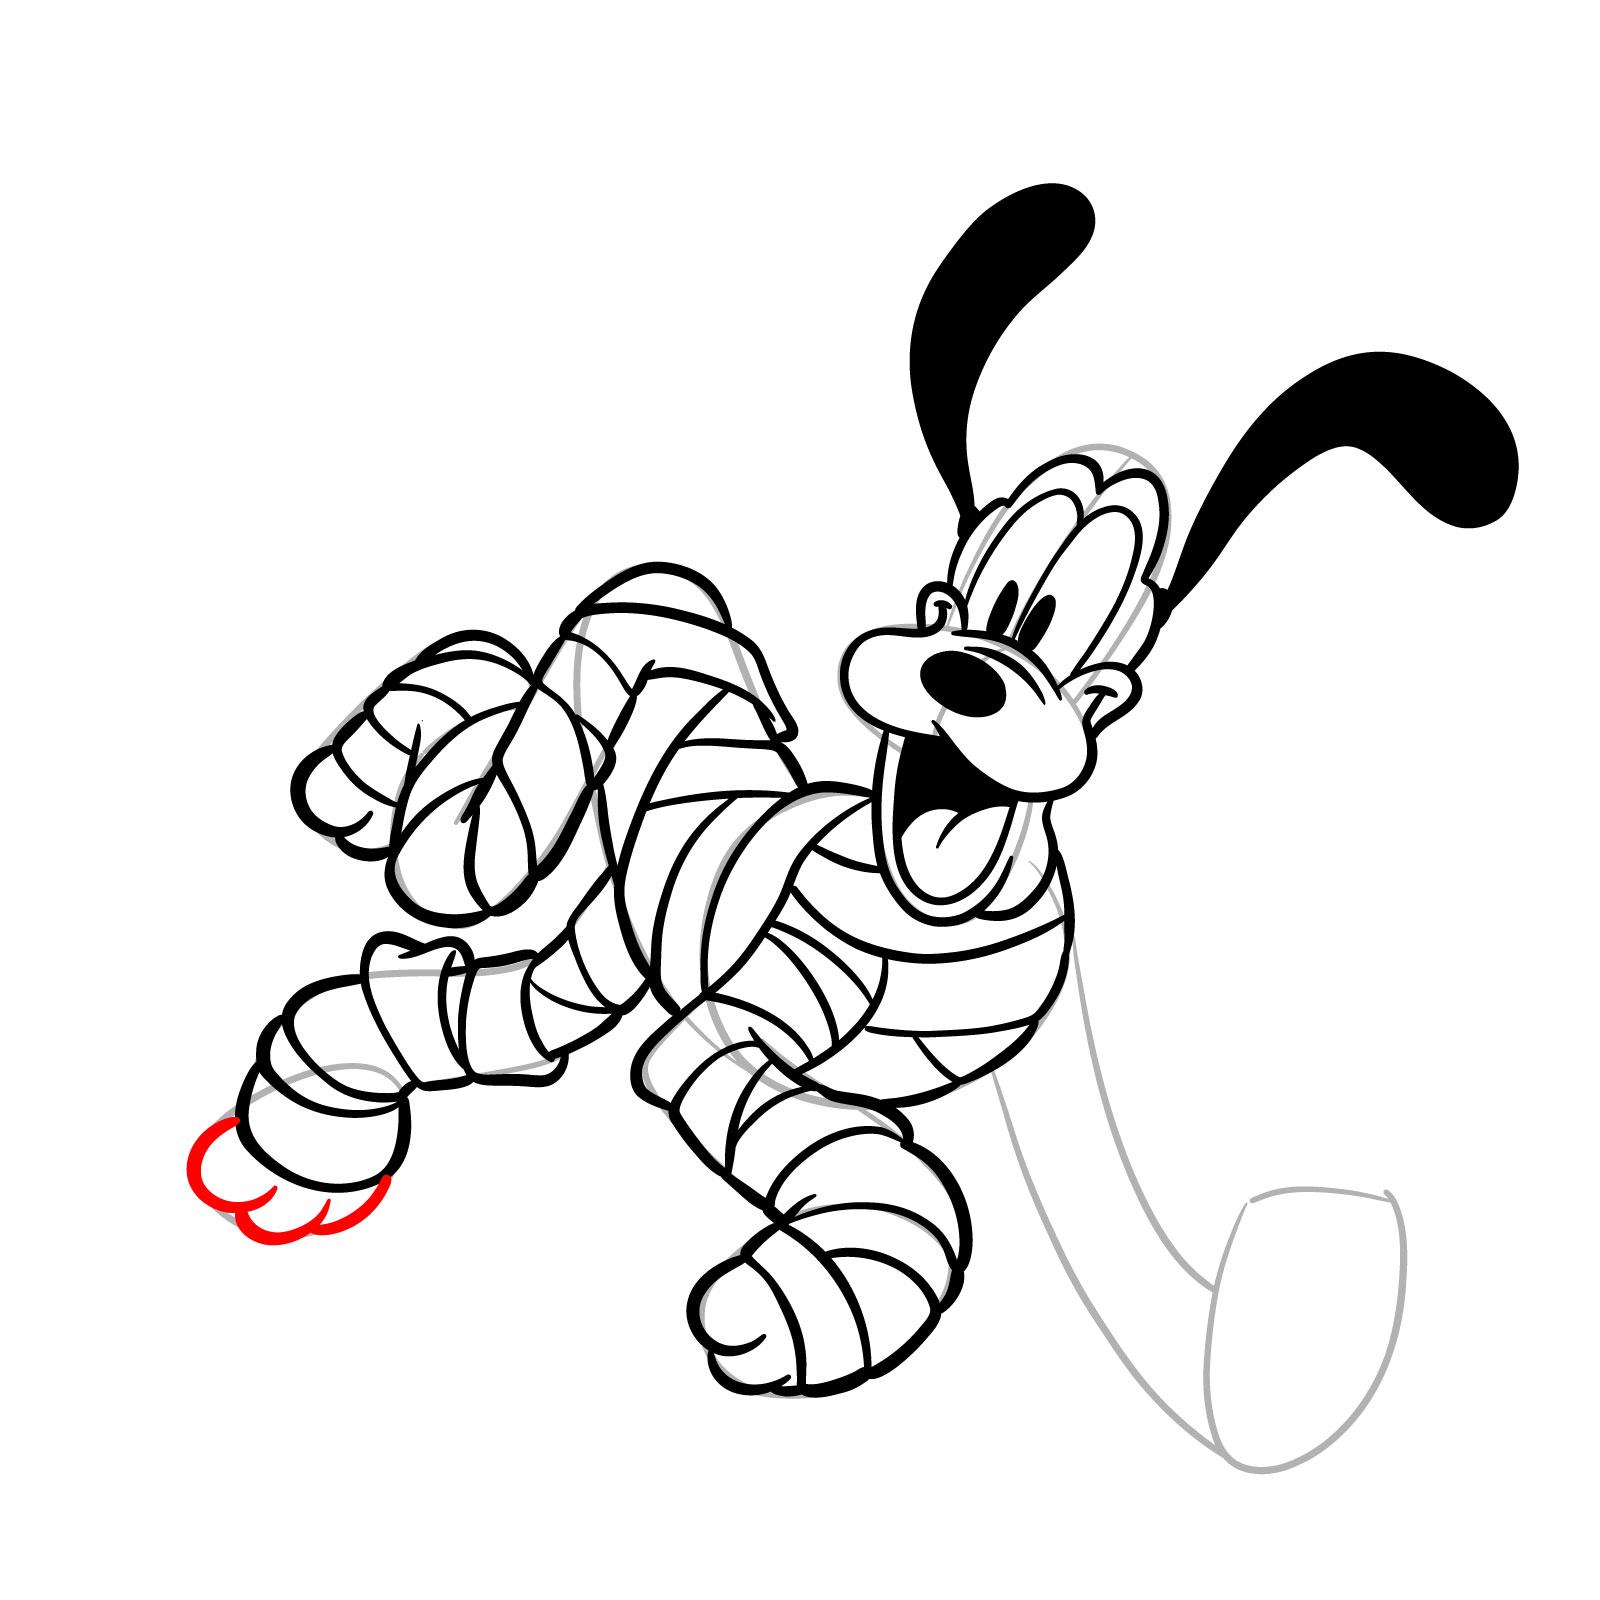 How to draw Halloween Pluto as a mummy - step 23